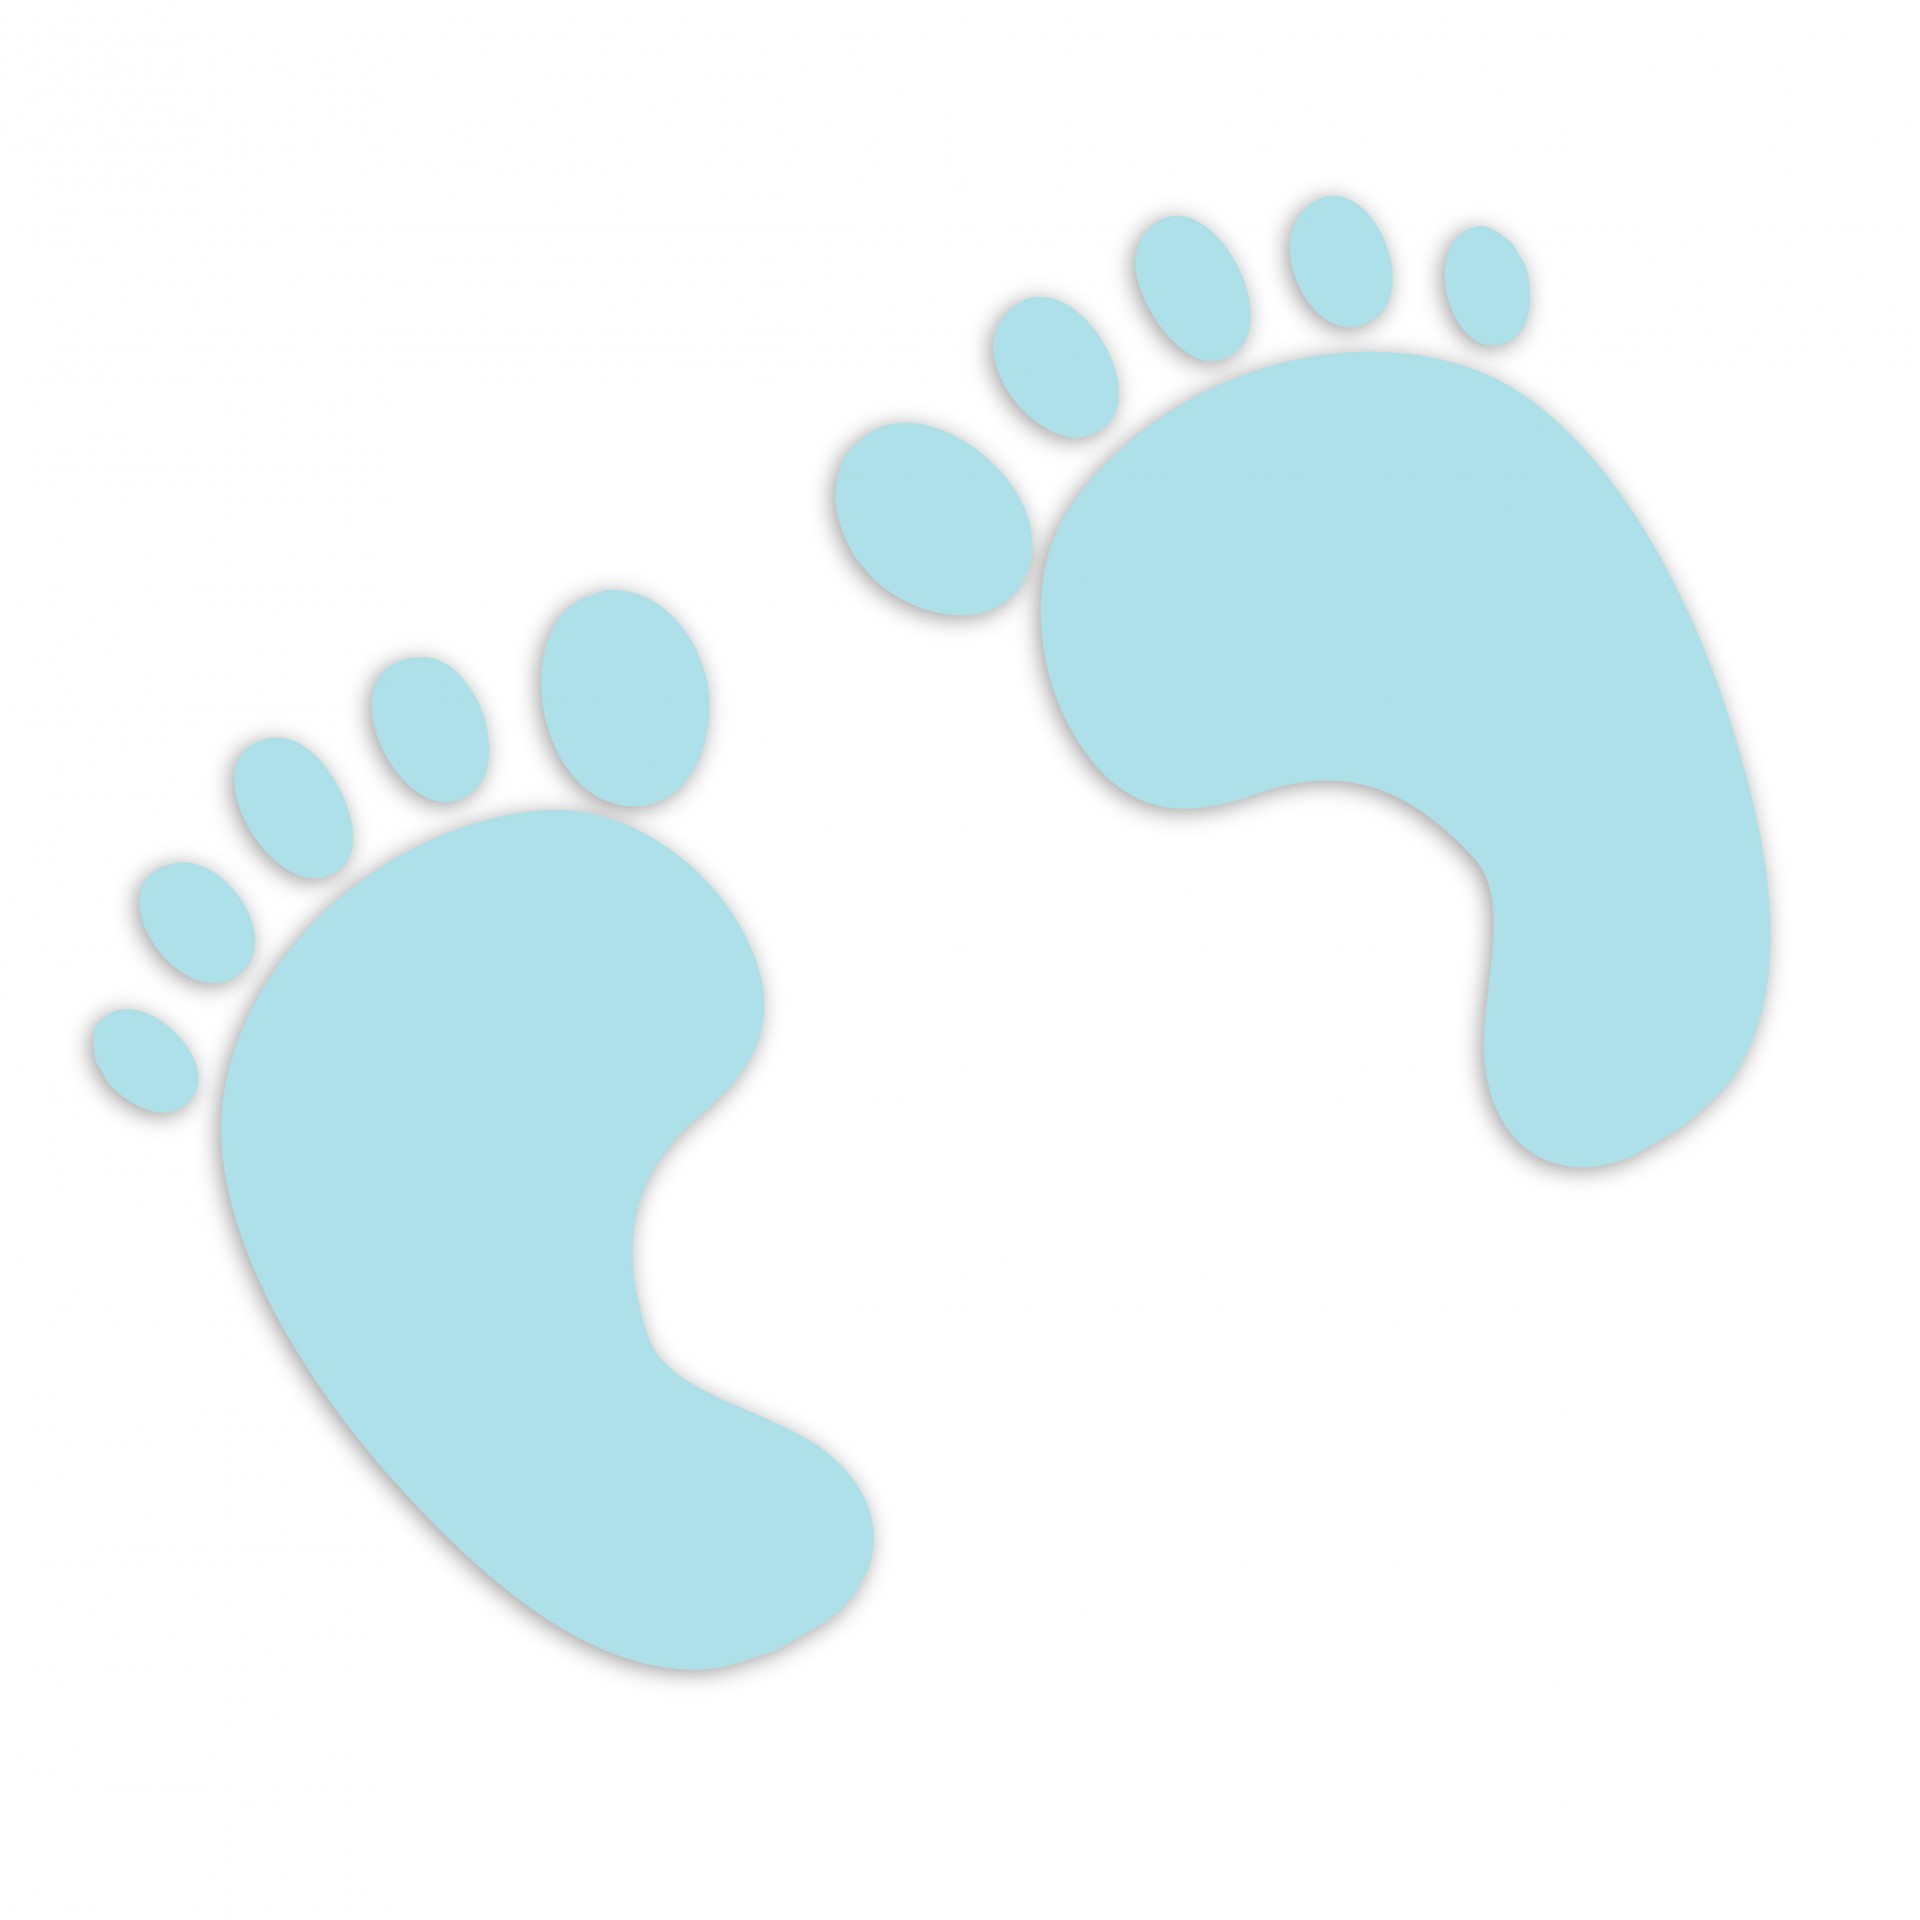 Pink Baby Feet Clip Art At Cl